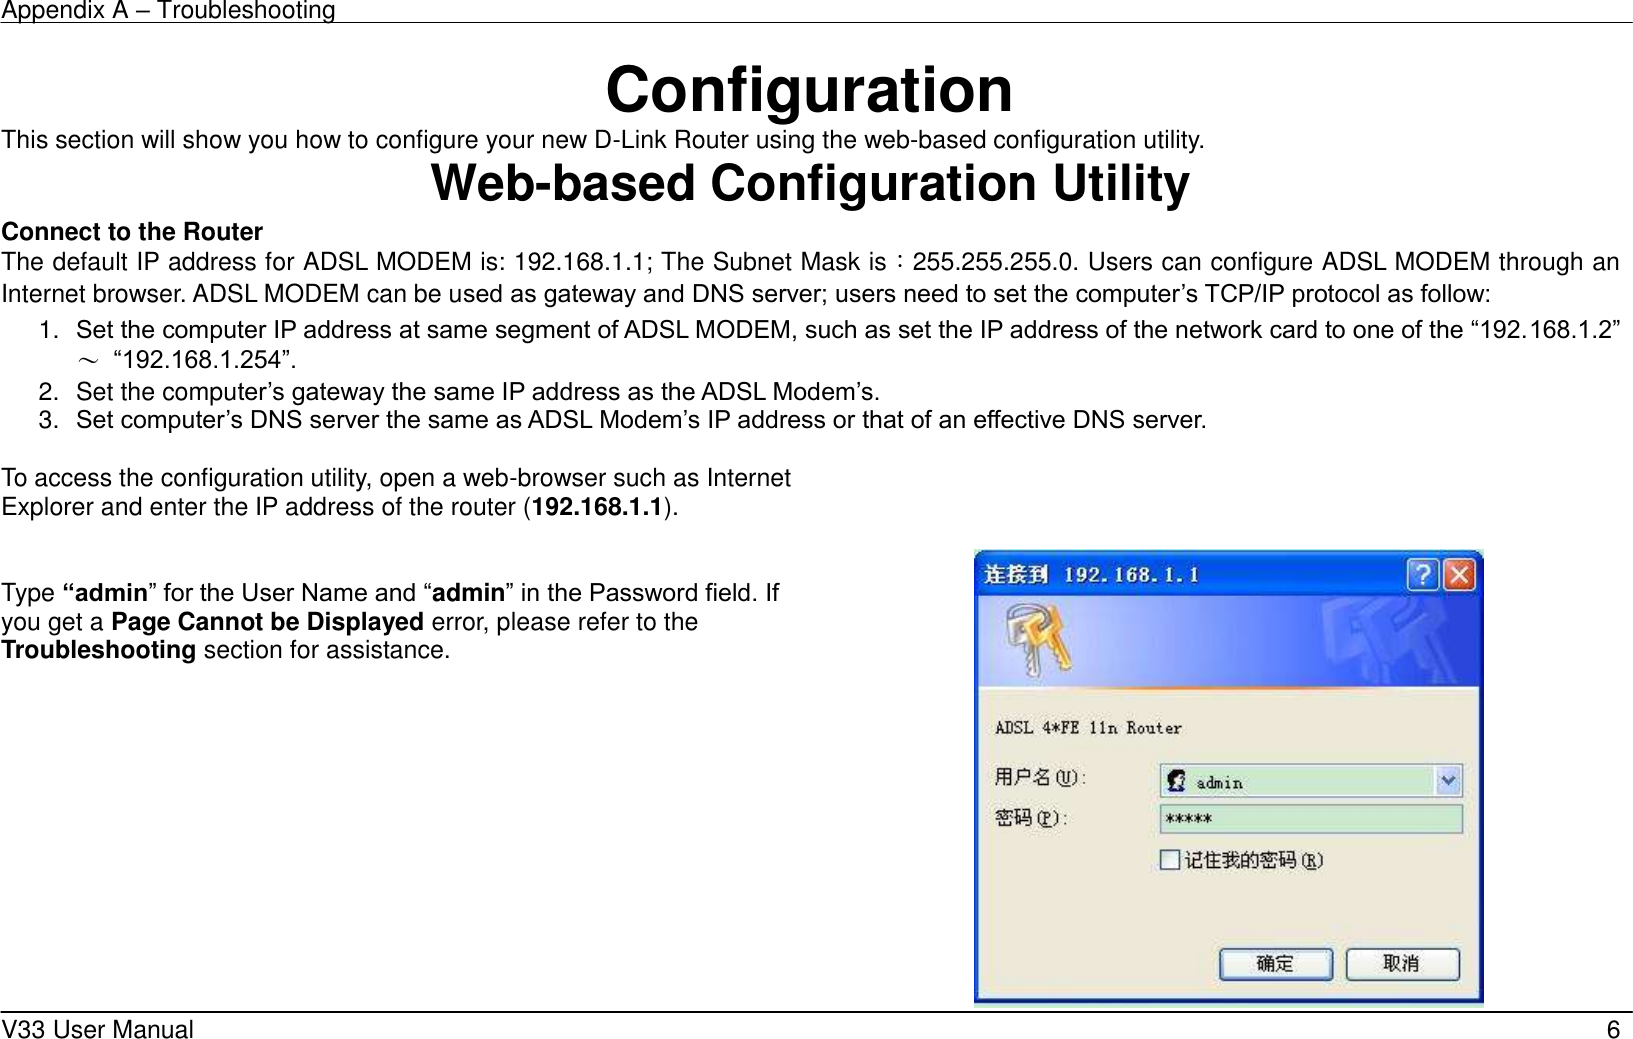 Appendix A – Troubleshooting    V33 User Manual   6 Configuration This section will show you how to configure your new D-Link Router using the web-based configuration utility. Web-based Configuration Utility Connect to the Router   The default IP address for ADSL MODEM is: 192.168.1.1; The Subnet Mask is：255.255.255.0. Users can configure ADSL MODEM through an Internet browser. ADSL MODEM can be used as gateway and DNS server; users need to set the computer’s TCP/IP protocol as follow: 1. Set the computer IP address at same segment of ADSL MODEM, such as set the IP address of the network card to one of the “192.168.1.2”～ “192.168.1.254”. 2.  Set the computer’s gateway the same IP address as the ADSL Modem’s. 3. Set computer’s DNS server the same as ADSL Modem’s IP address or that of an effective DNS server.  To access the configuration utility, open a web-browser such as Internet Explorer and enter the IP address of the router (192.168.1.1).     Type “admin” for the User Name and “admin” in the Password field. If you get a Page Cannot be Displayed error, please refer to the Troubleshooting section for assistance.  